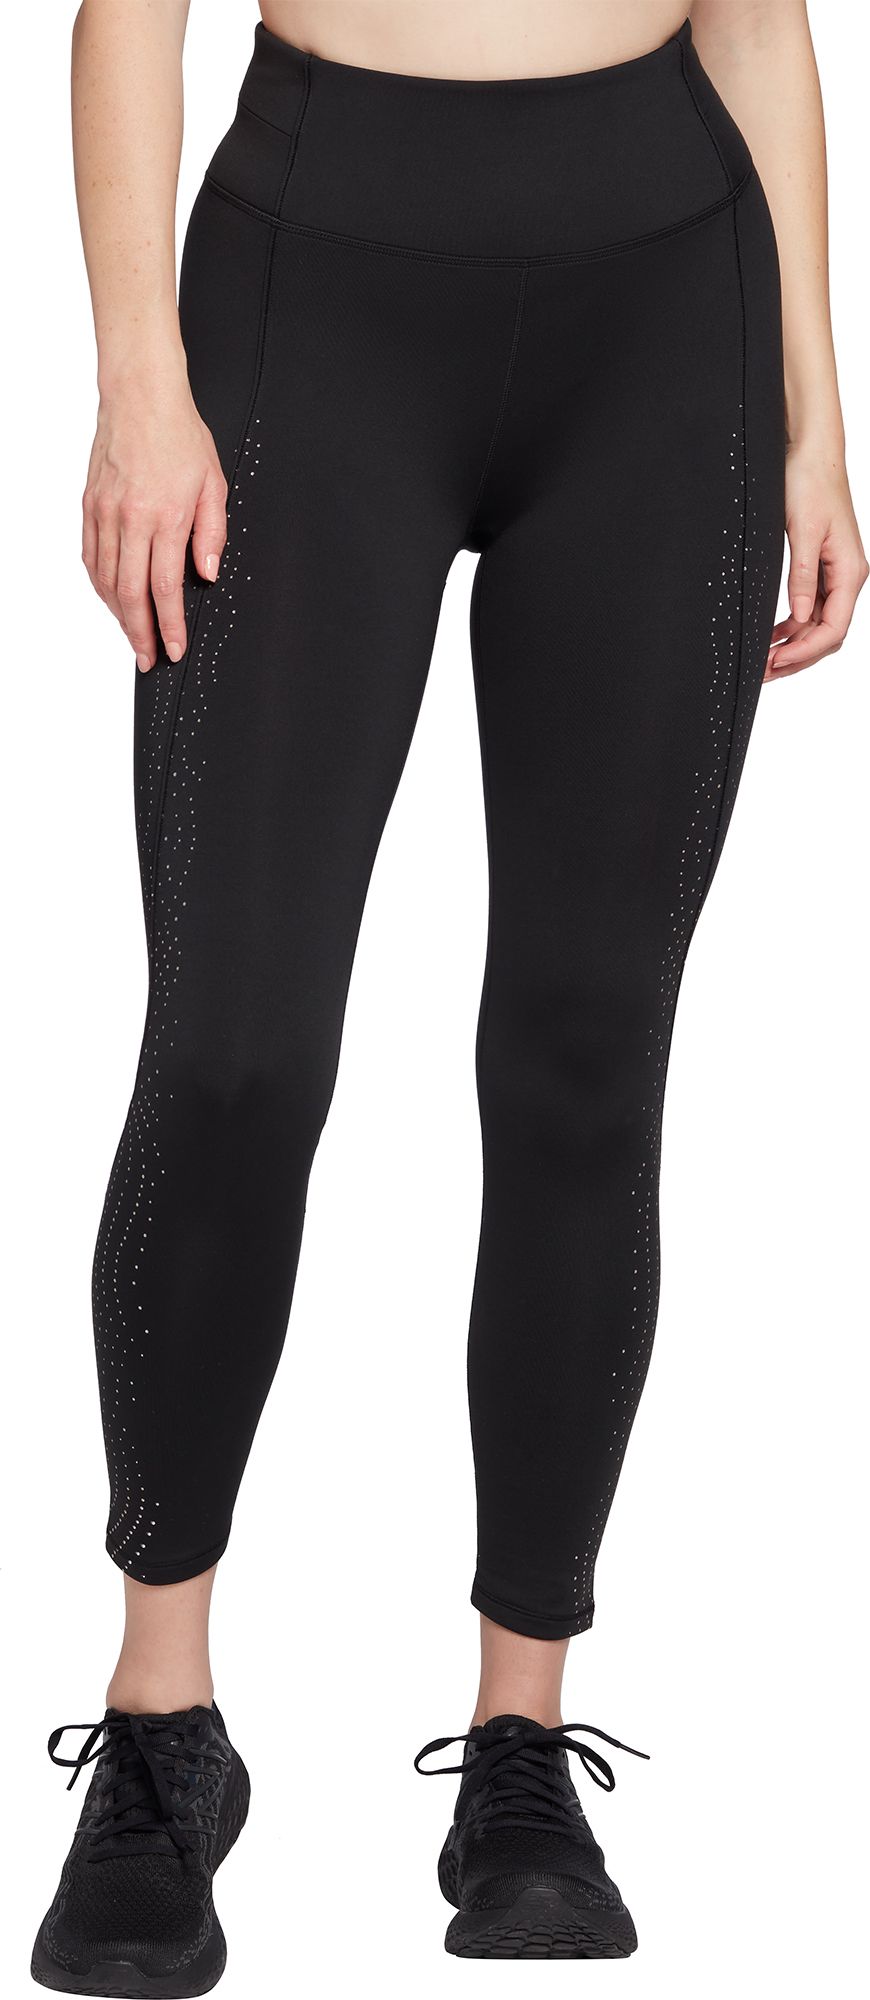 Women's Cold Weather Compression Reflective Running Tights